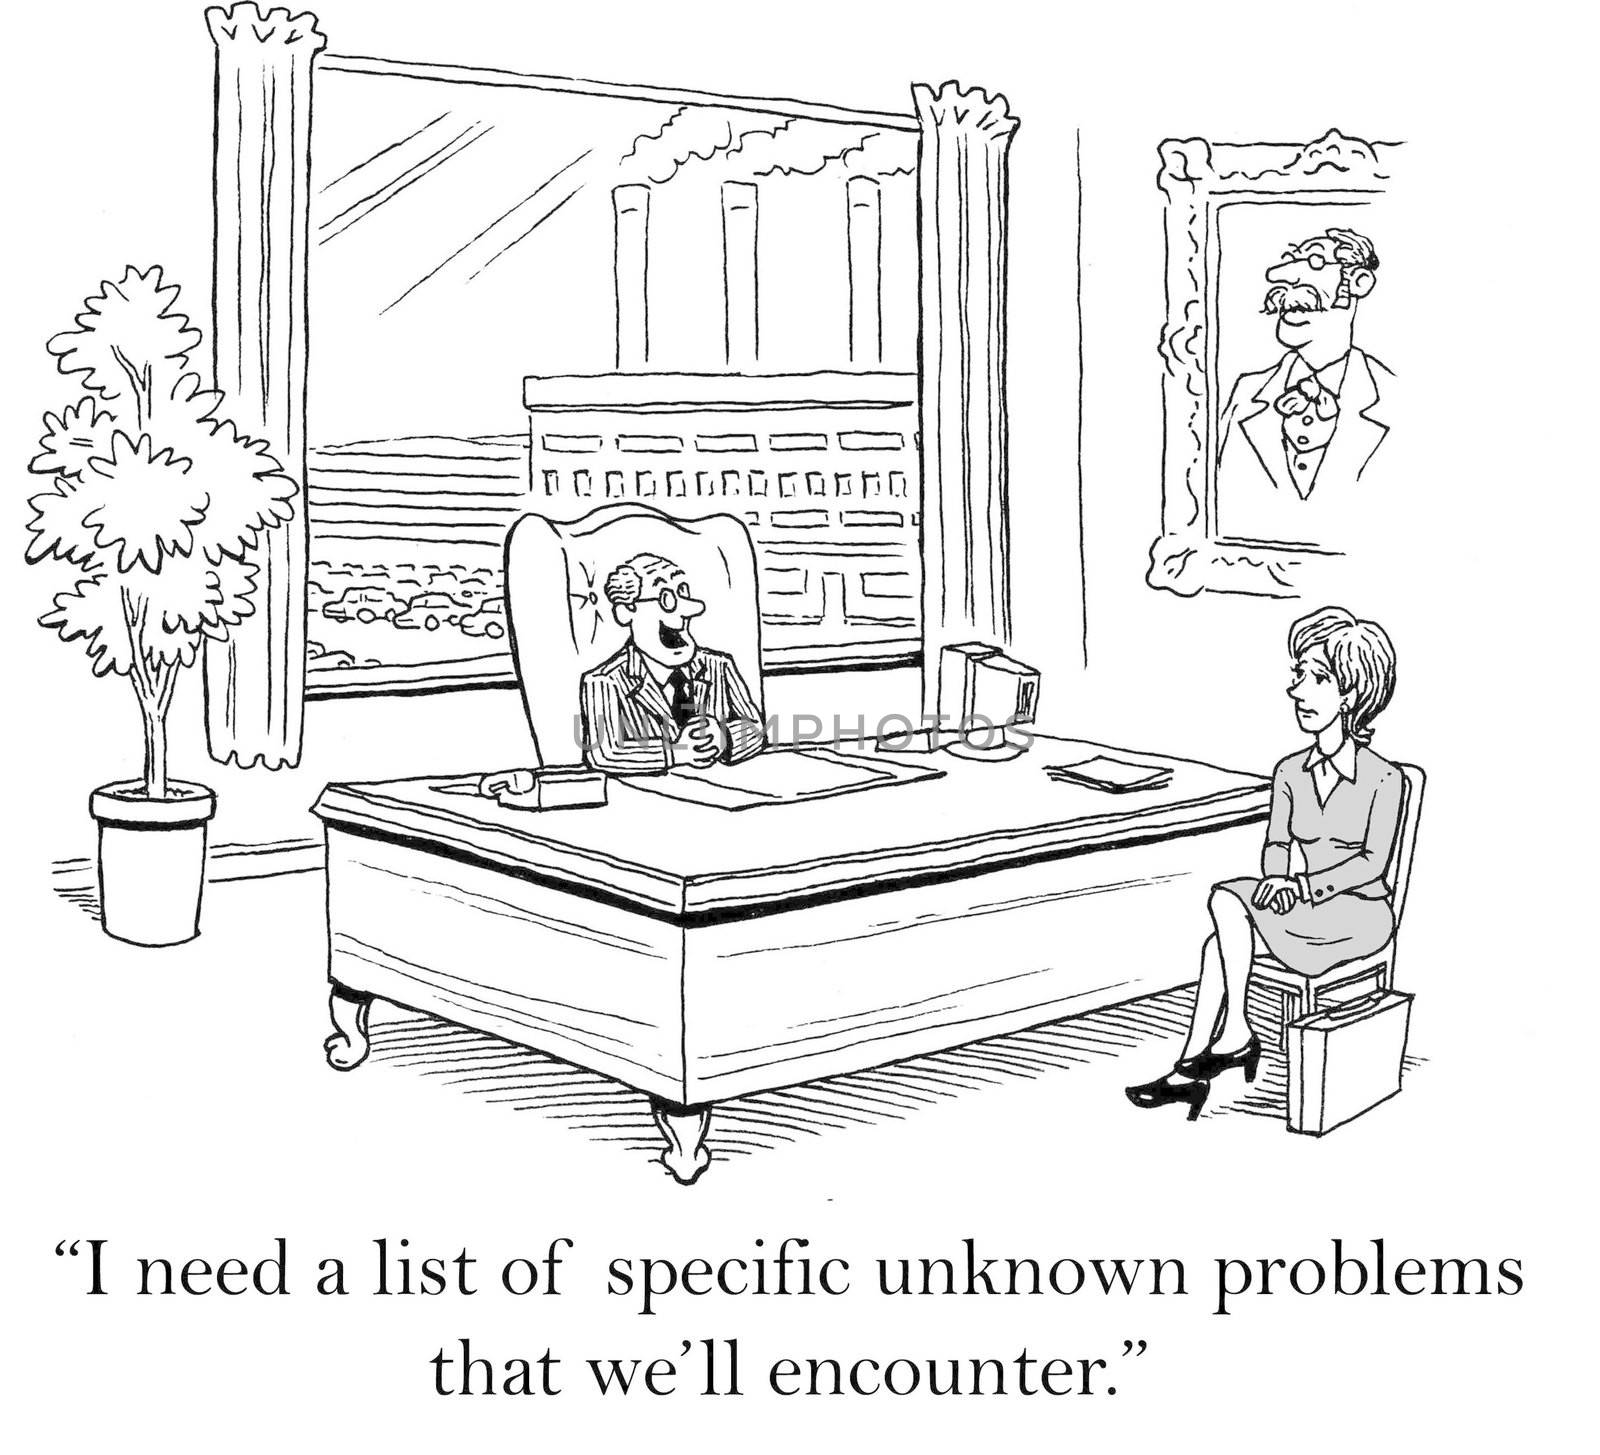 "I need a list of specific unknown problems that we'll encounter."